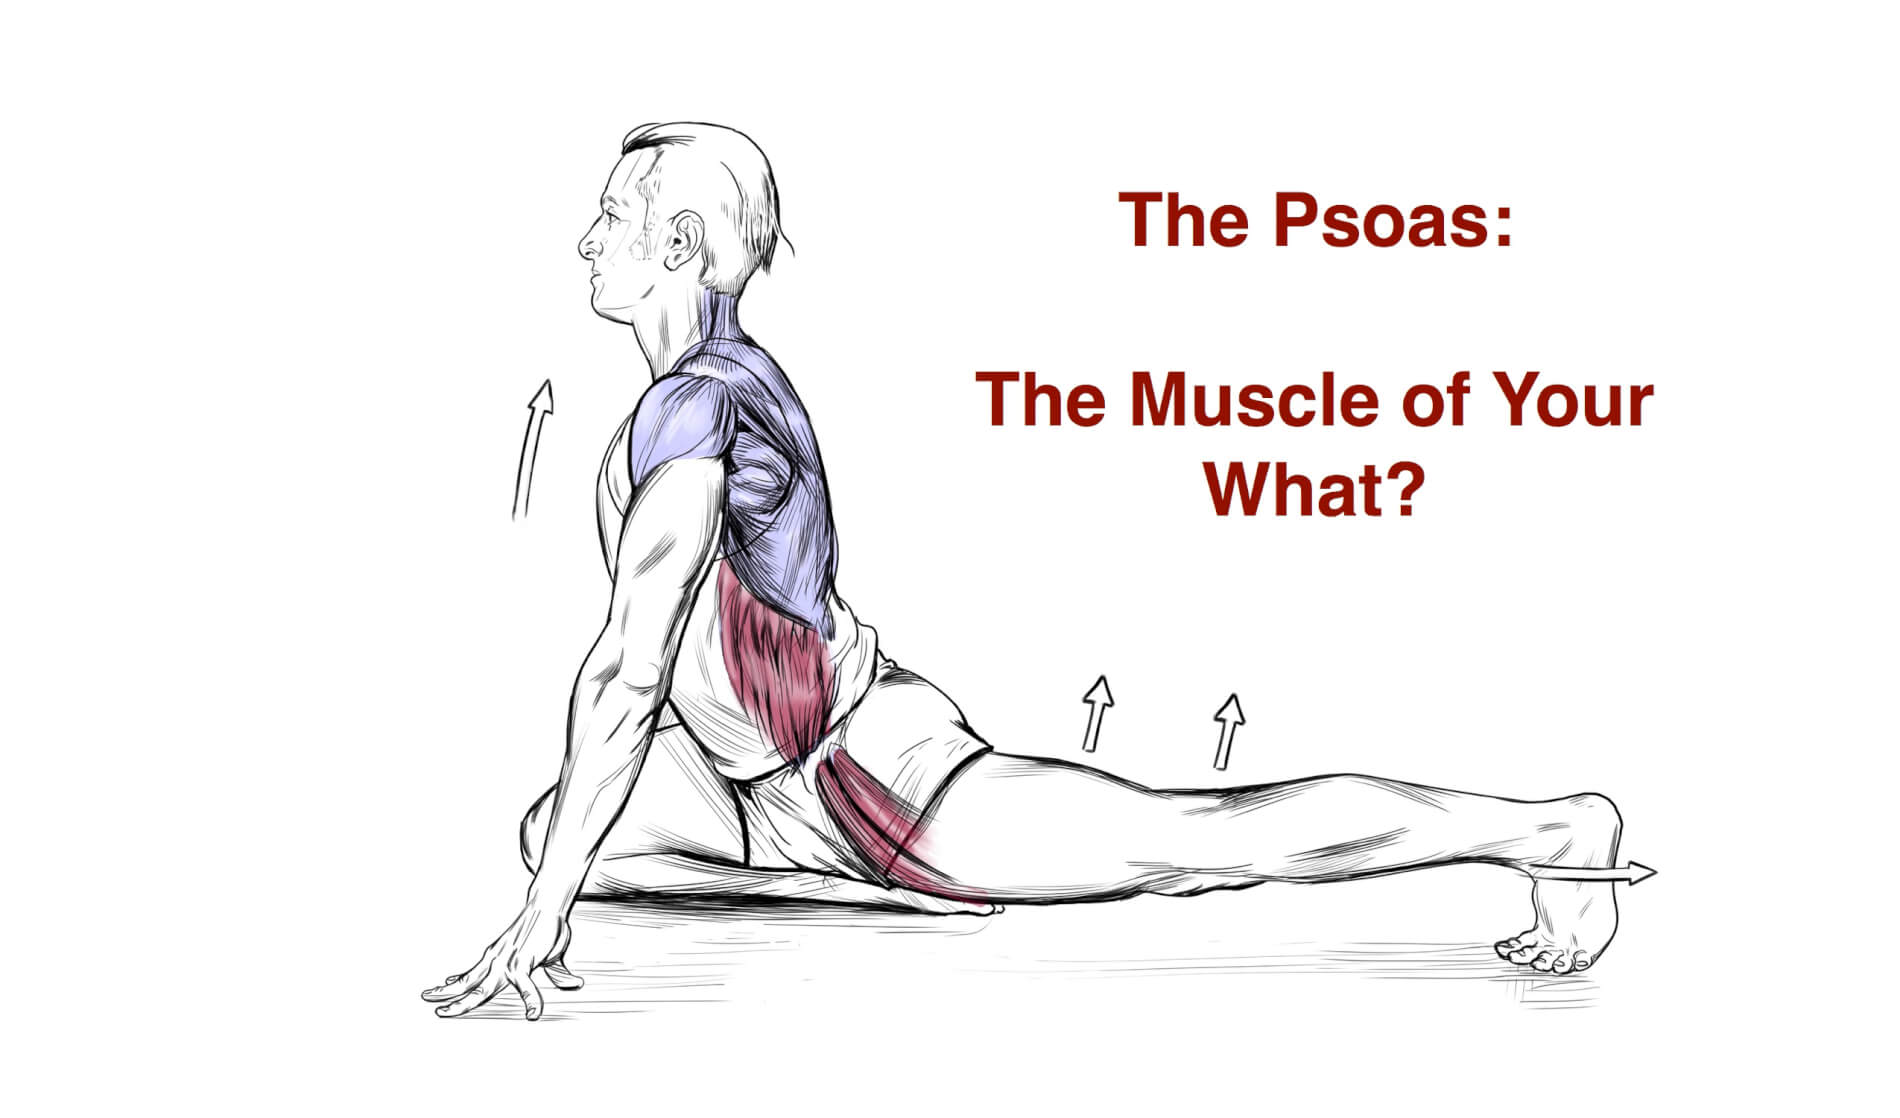 The Psoas is not the muscle of your F@#$%ING soul